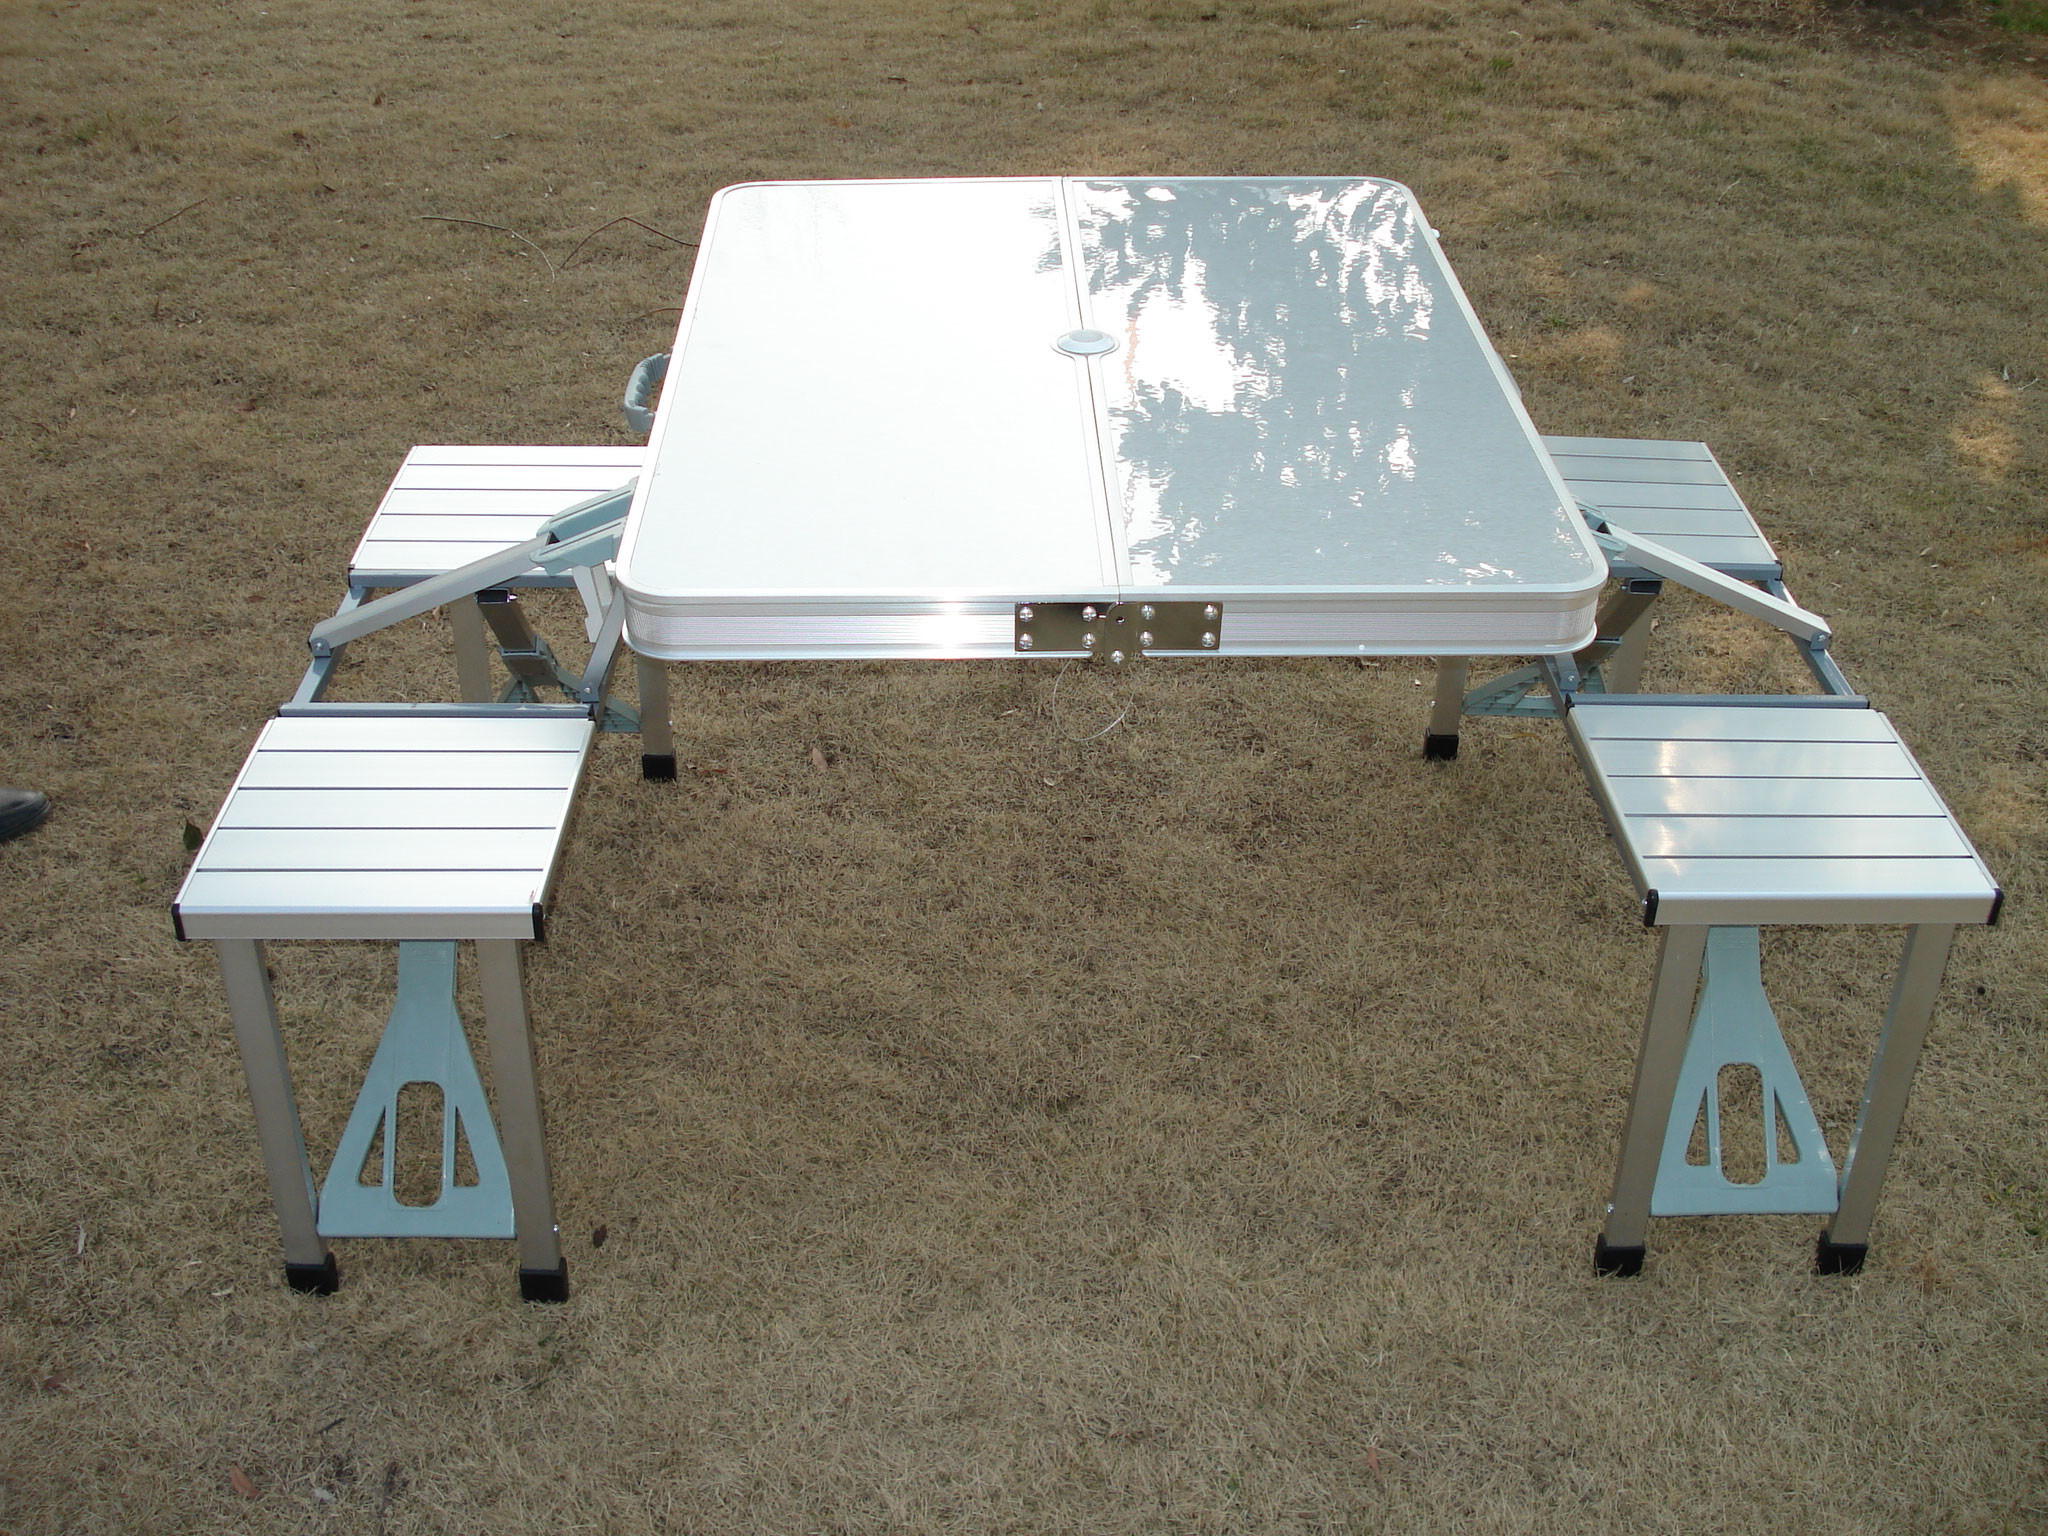 2048x1536 folding tables and chairs,portable table sets,